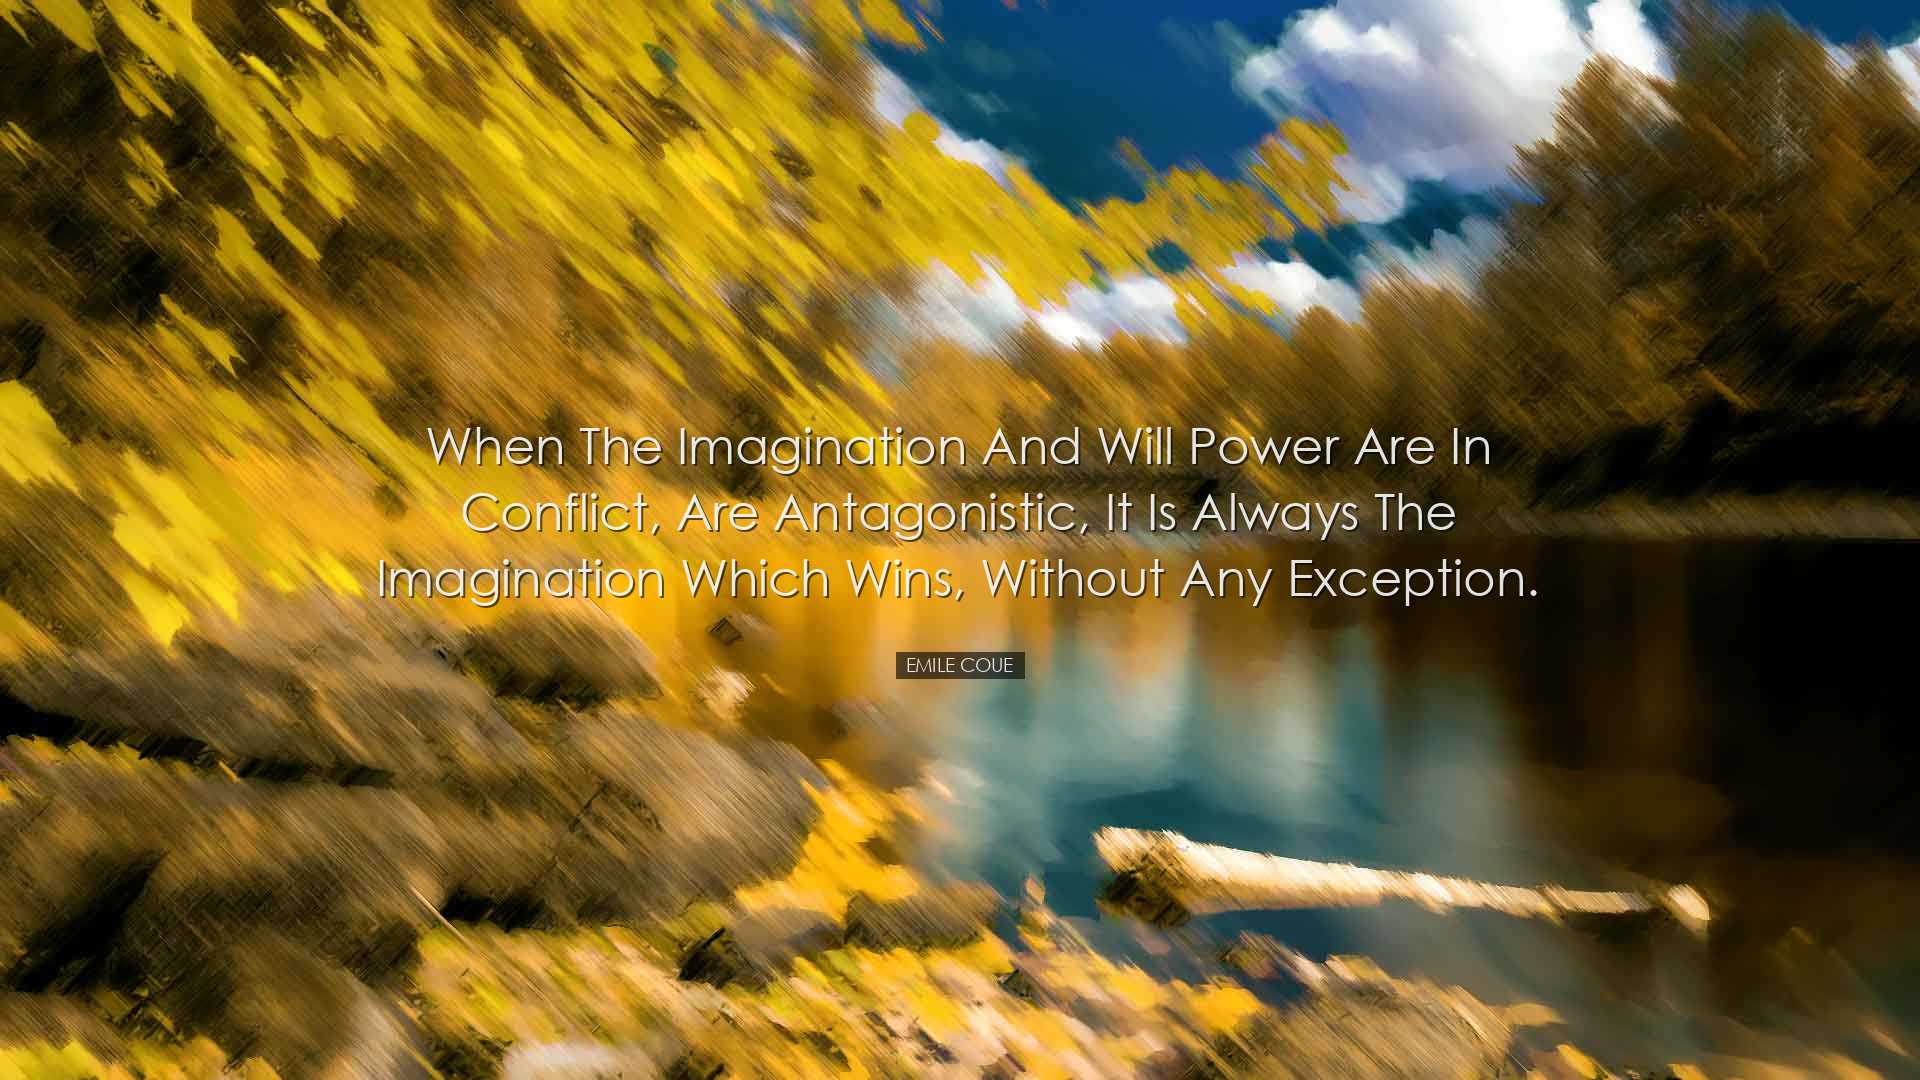 When the imagination and will power are in conflict, are antagonis